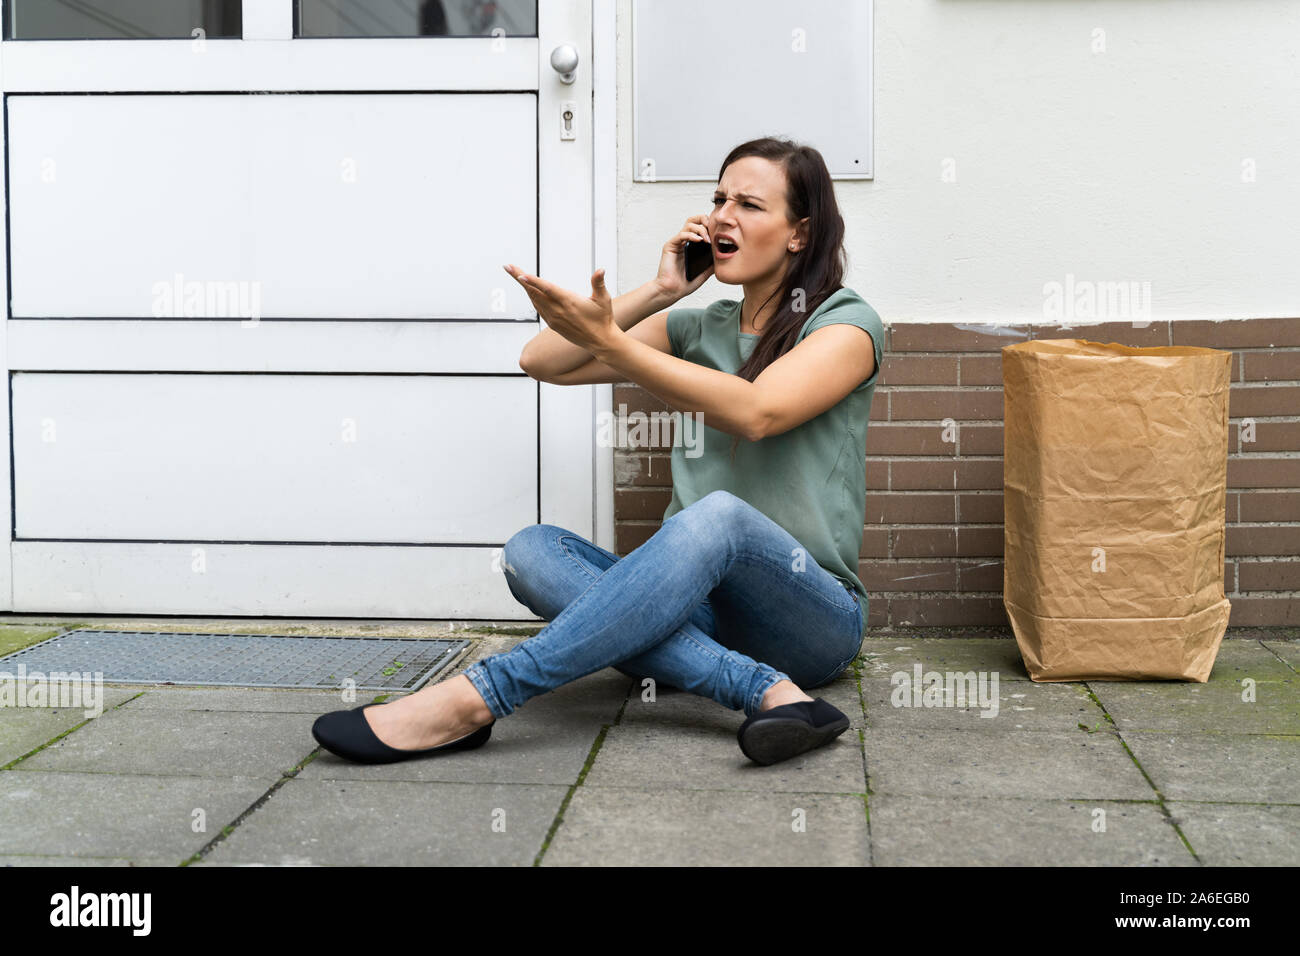 An Afraid Young Woman Sitting Outside The Door Talking On Mobilephone Stock Photo